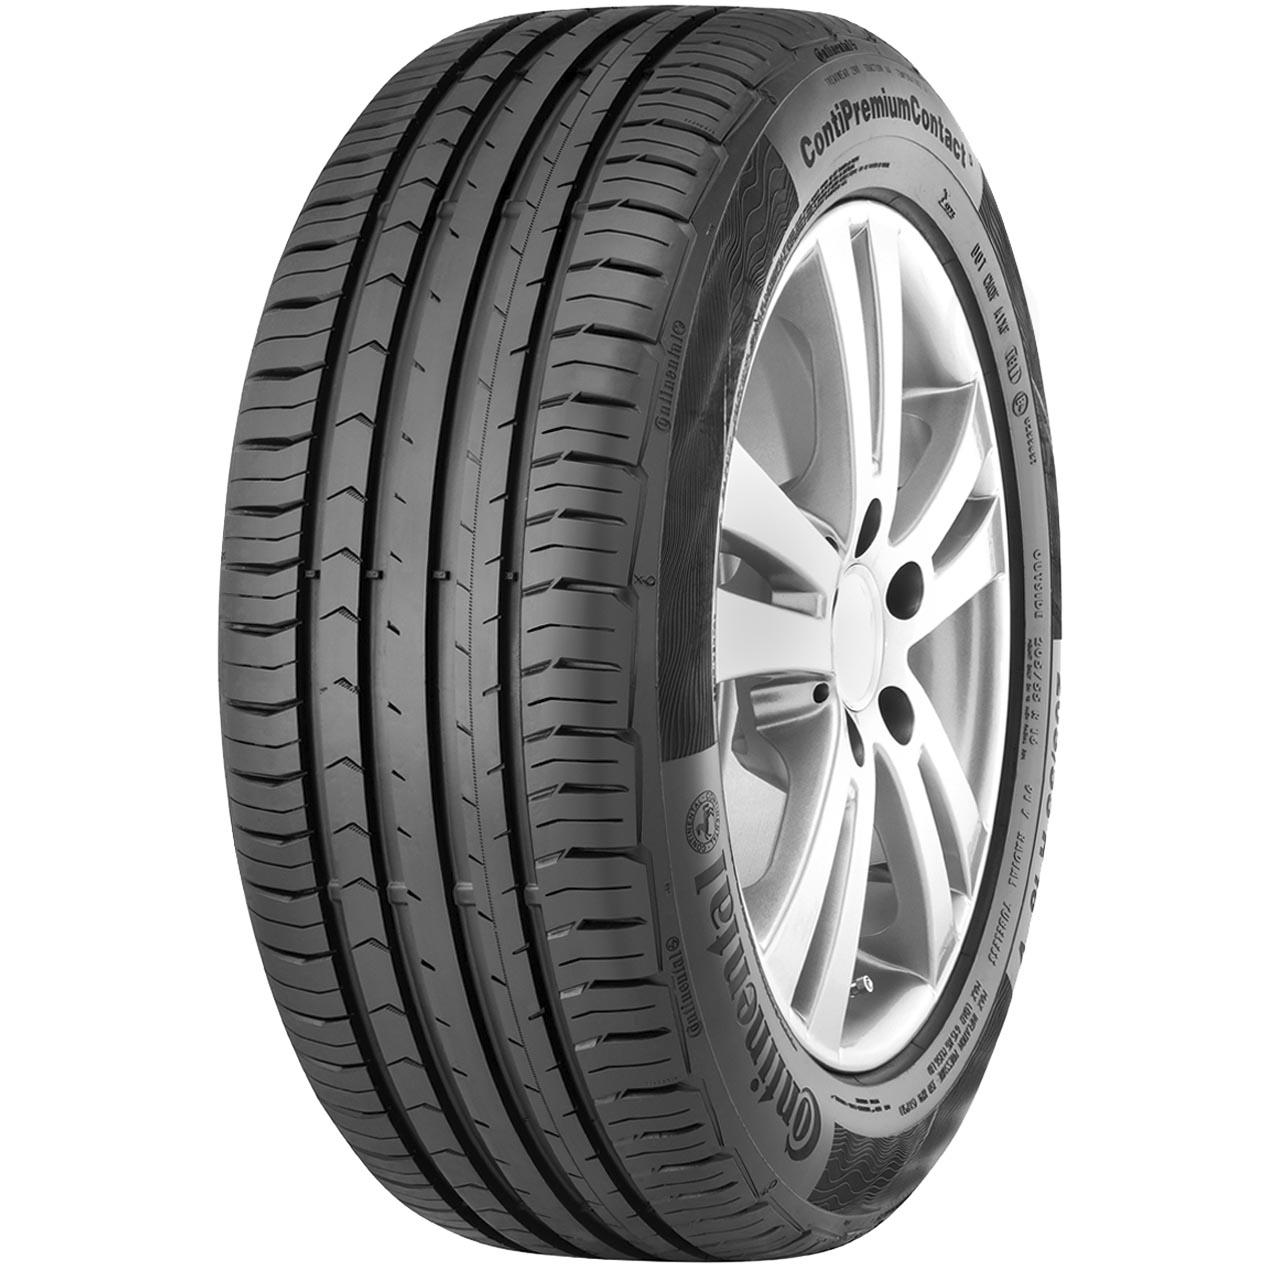 Continental CONTIPREMIUMCONTACT 5 225/55R17 97W *